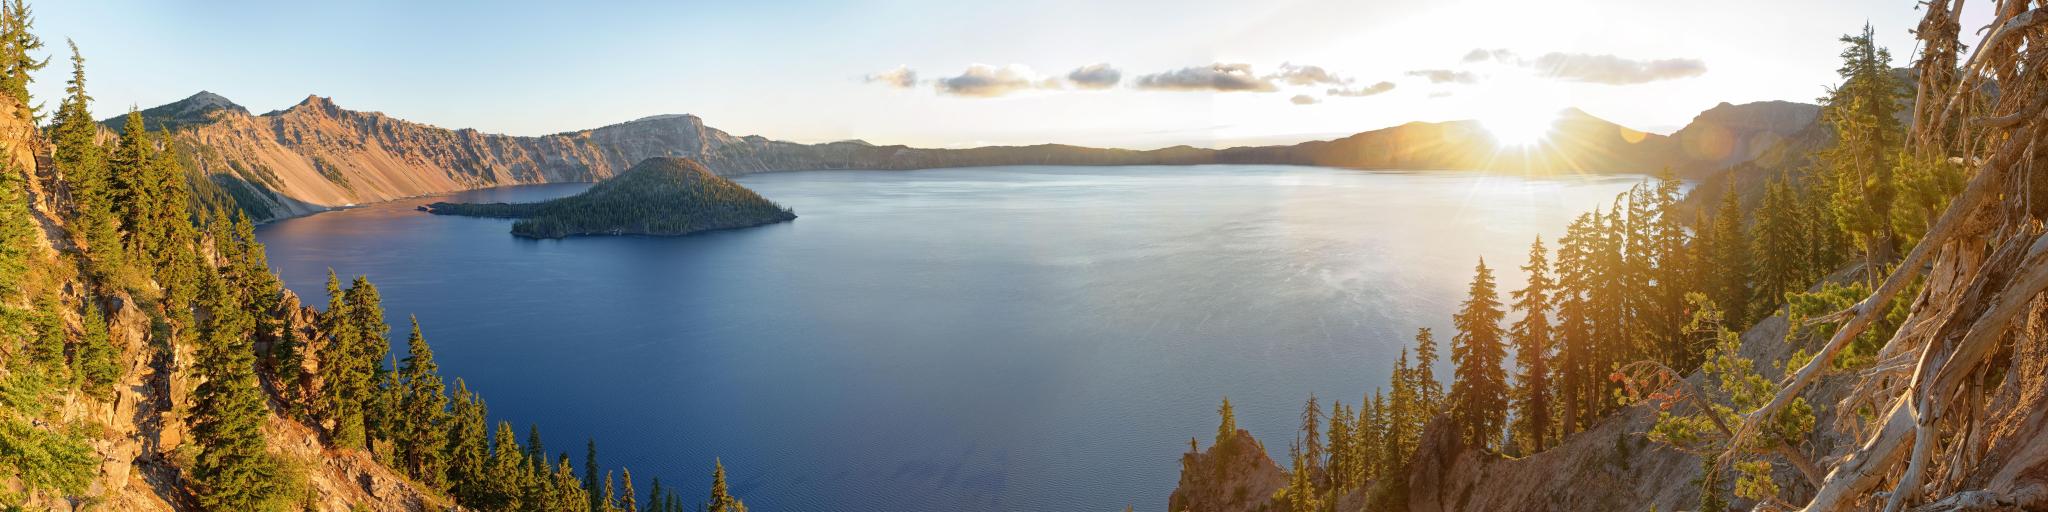 Crater Lake National Park at sunrise in the summer with still calm waters